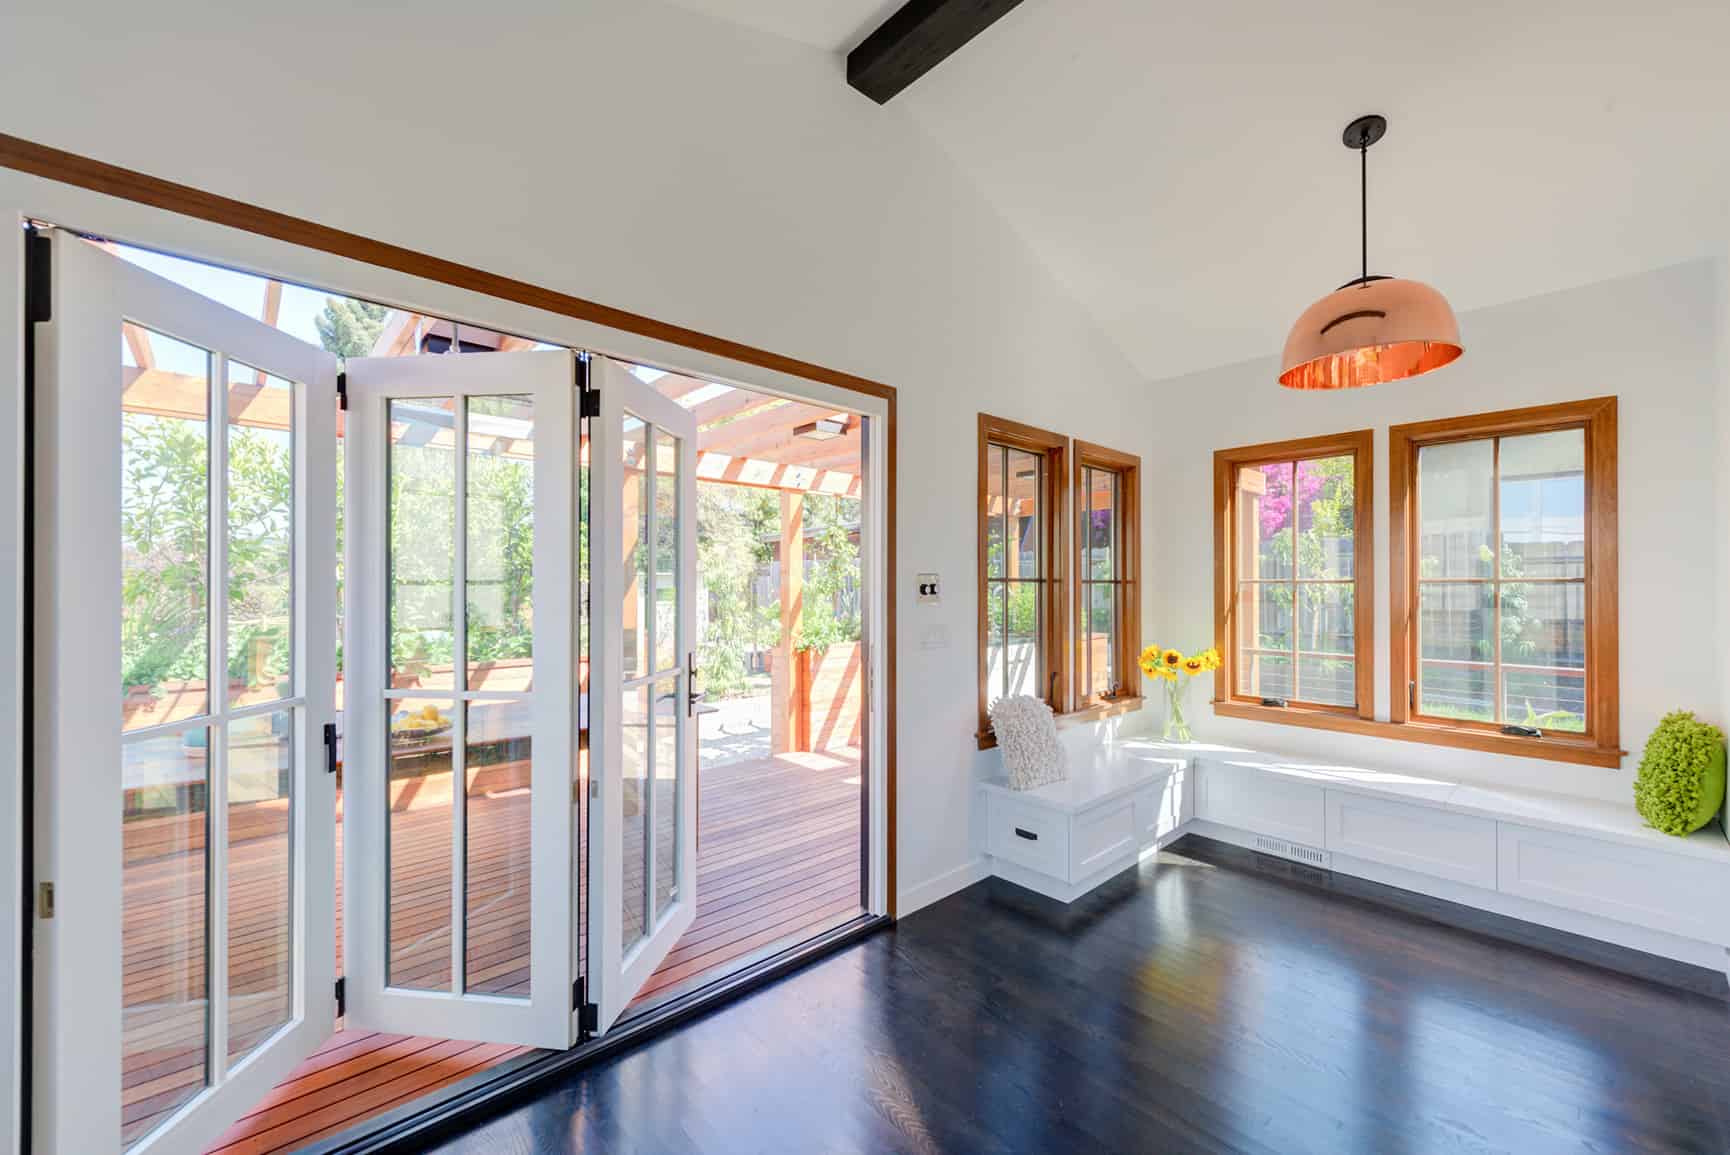 Interior view of sunroom addition with glass accordion doors to the exterior.